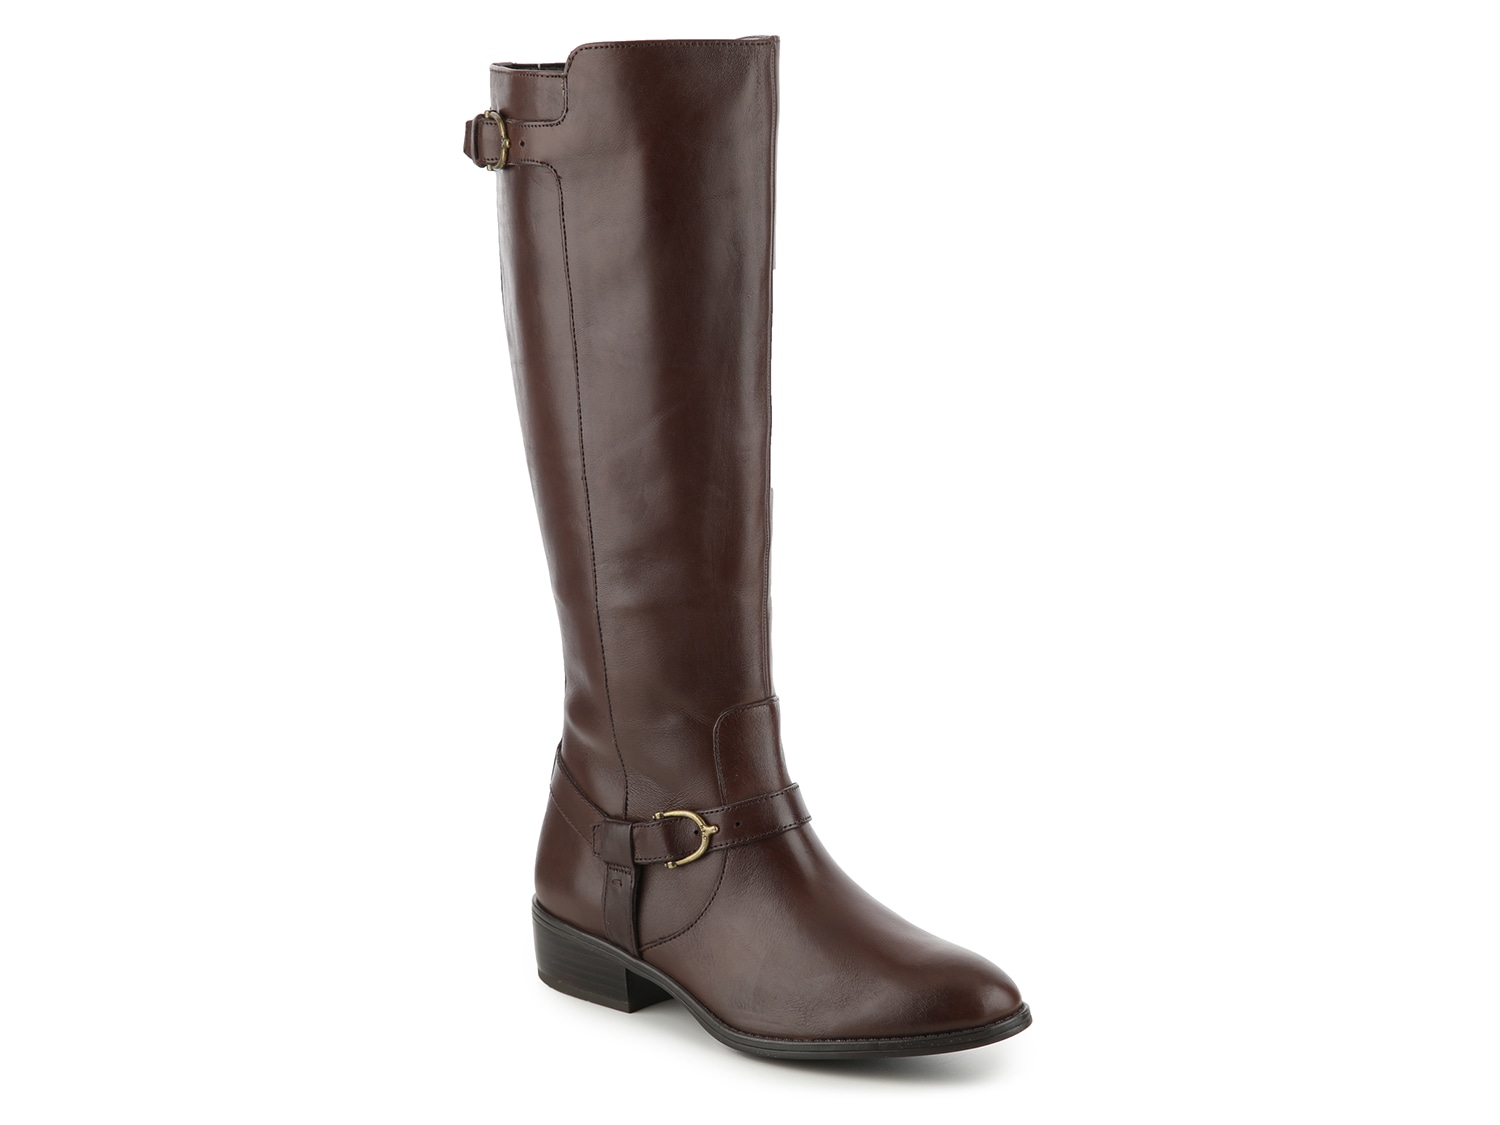 margarite riding boot